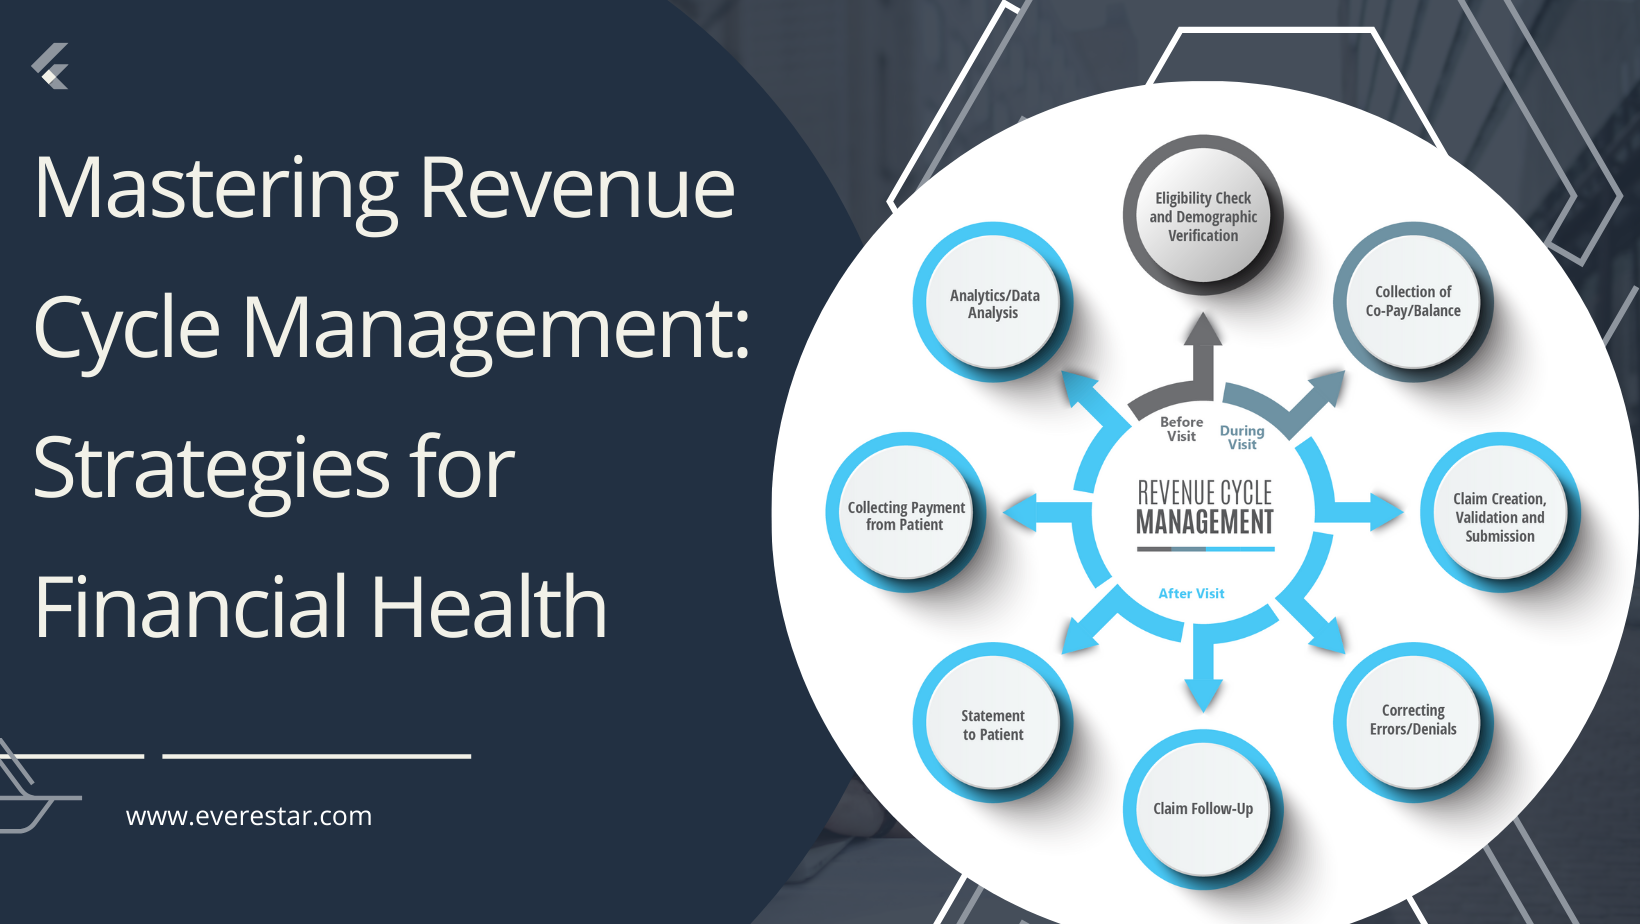 Mastering Revenue Cycle Management: Strategies for Financial Health